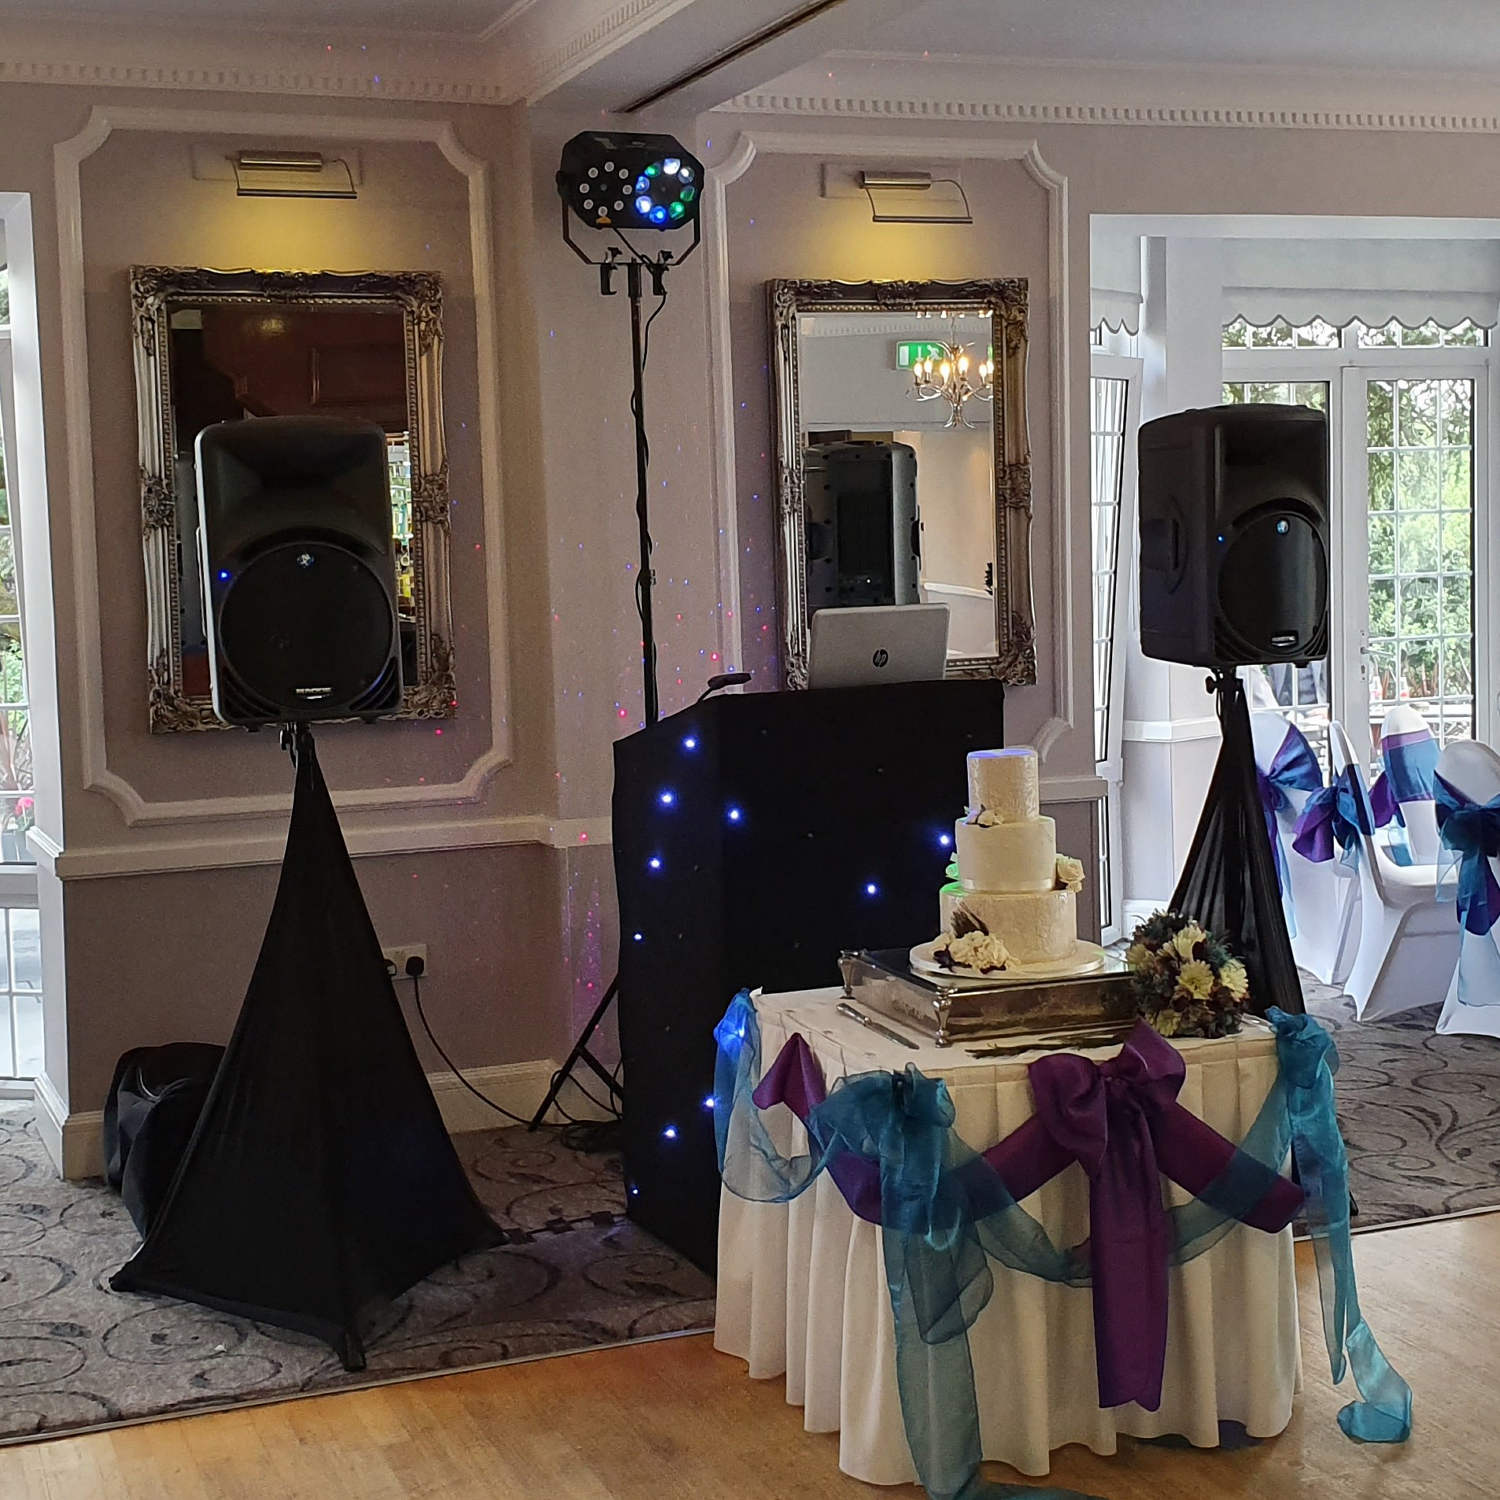 Black twinkling DJ booth behind wedding cake table on dance floor at wedding in south wales.